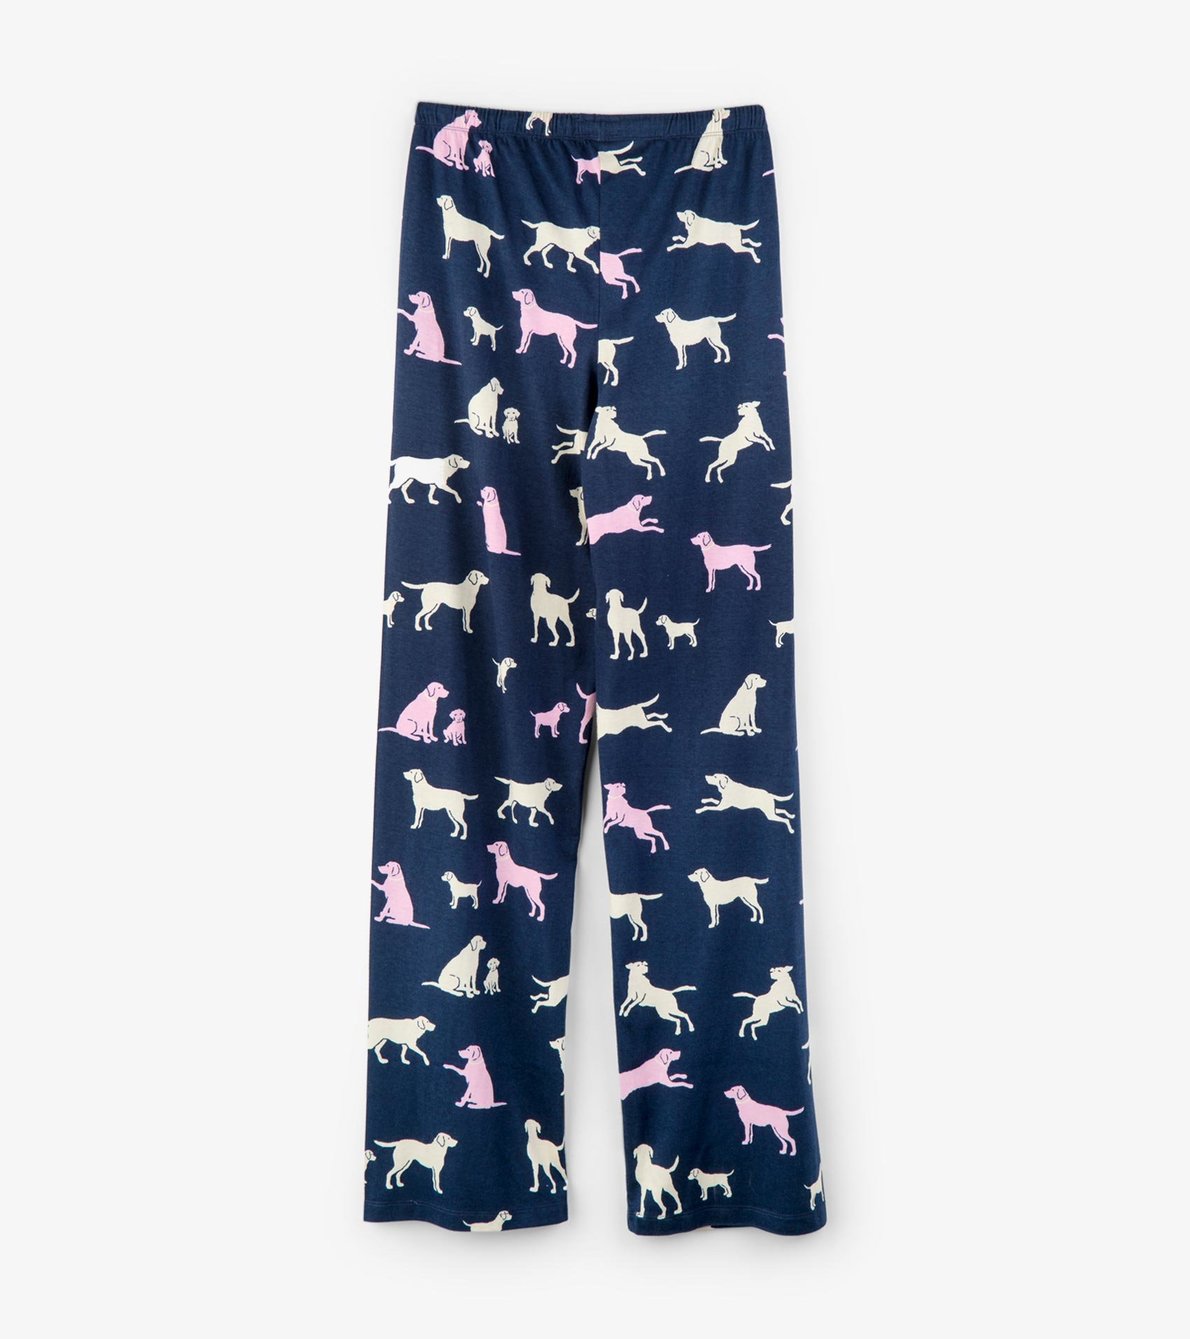 View larger image of Little Labs Women's Jersey Pajama Pants